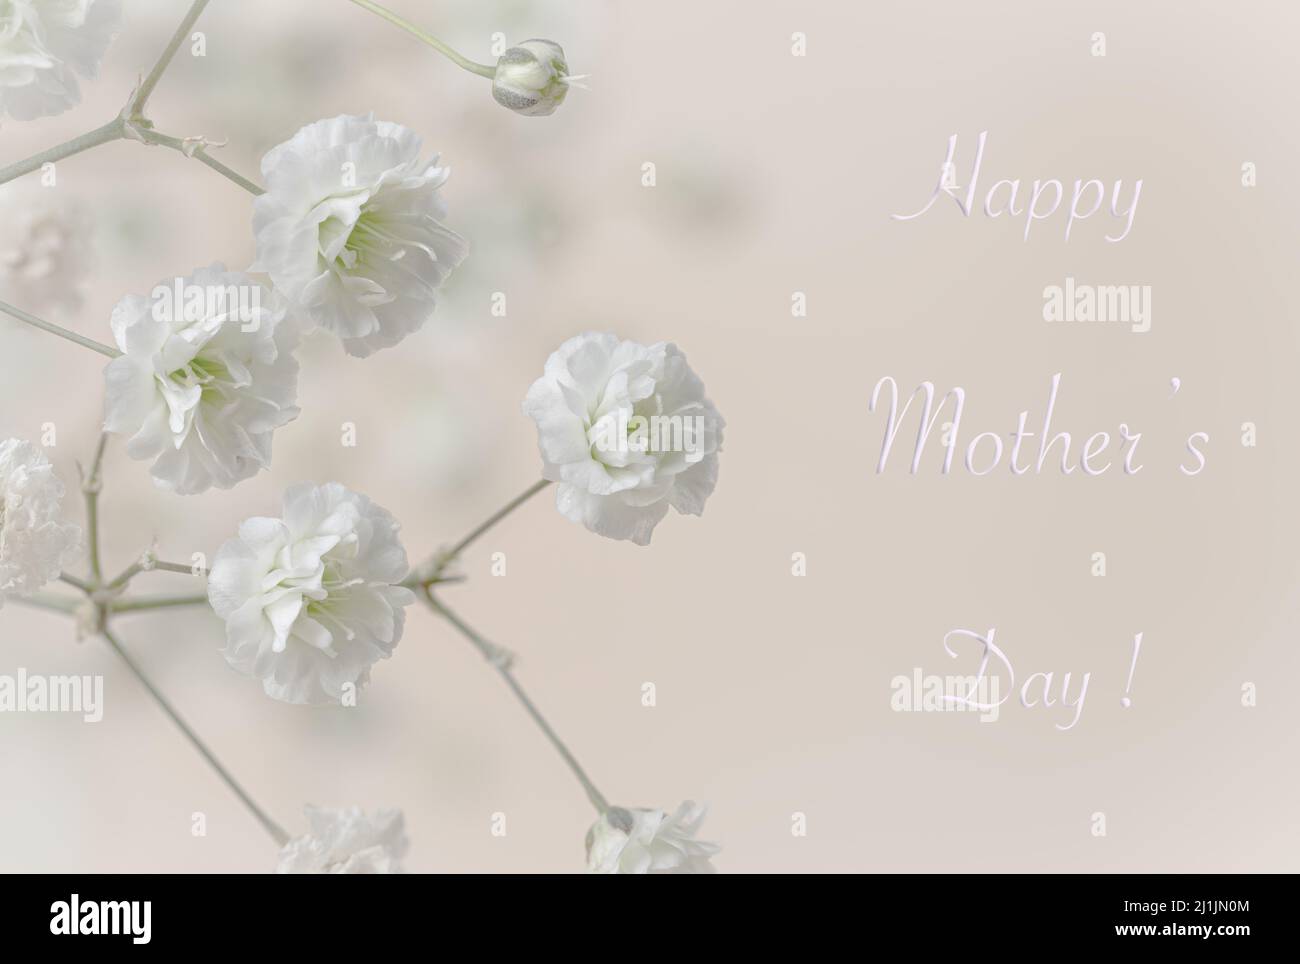 Happy Mothers Day text with closeup of baby's breath flowers on a pink background Stock Photo